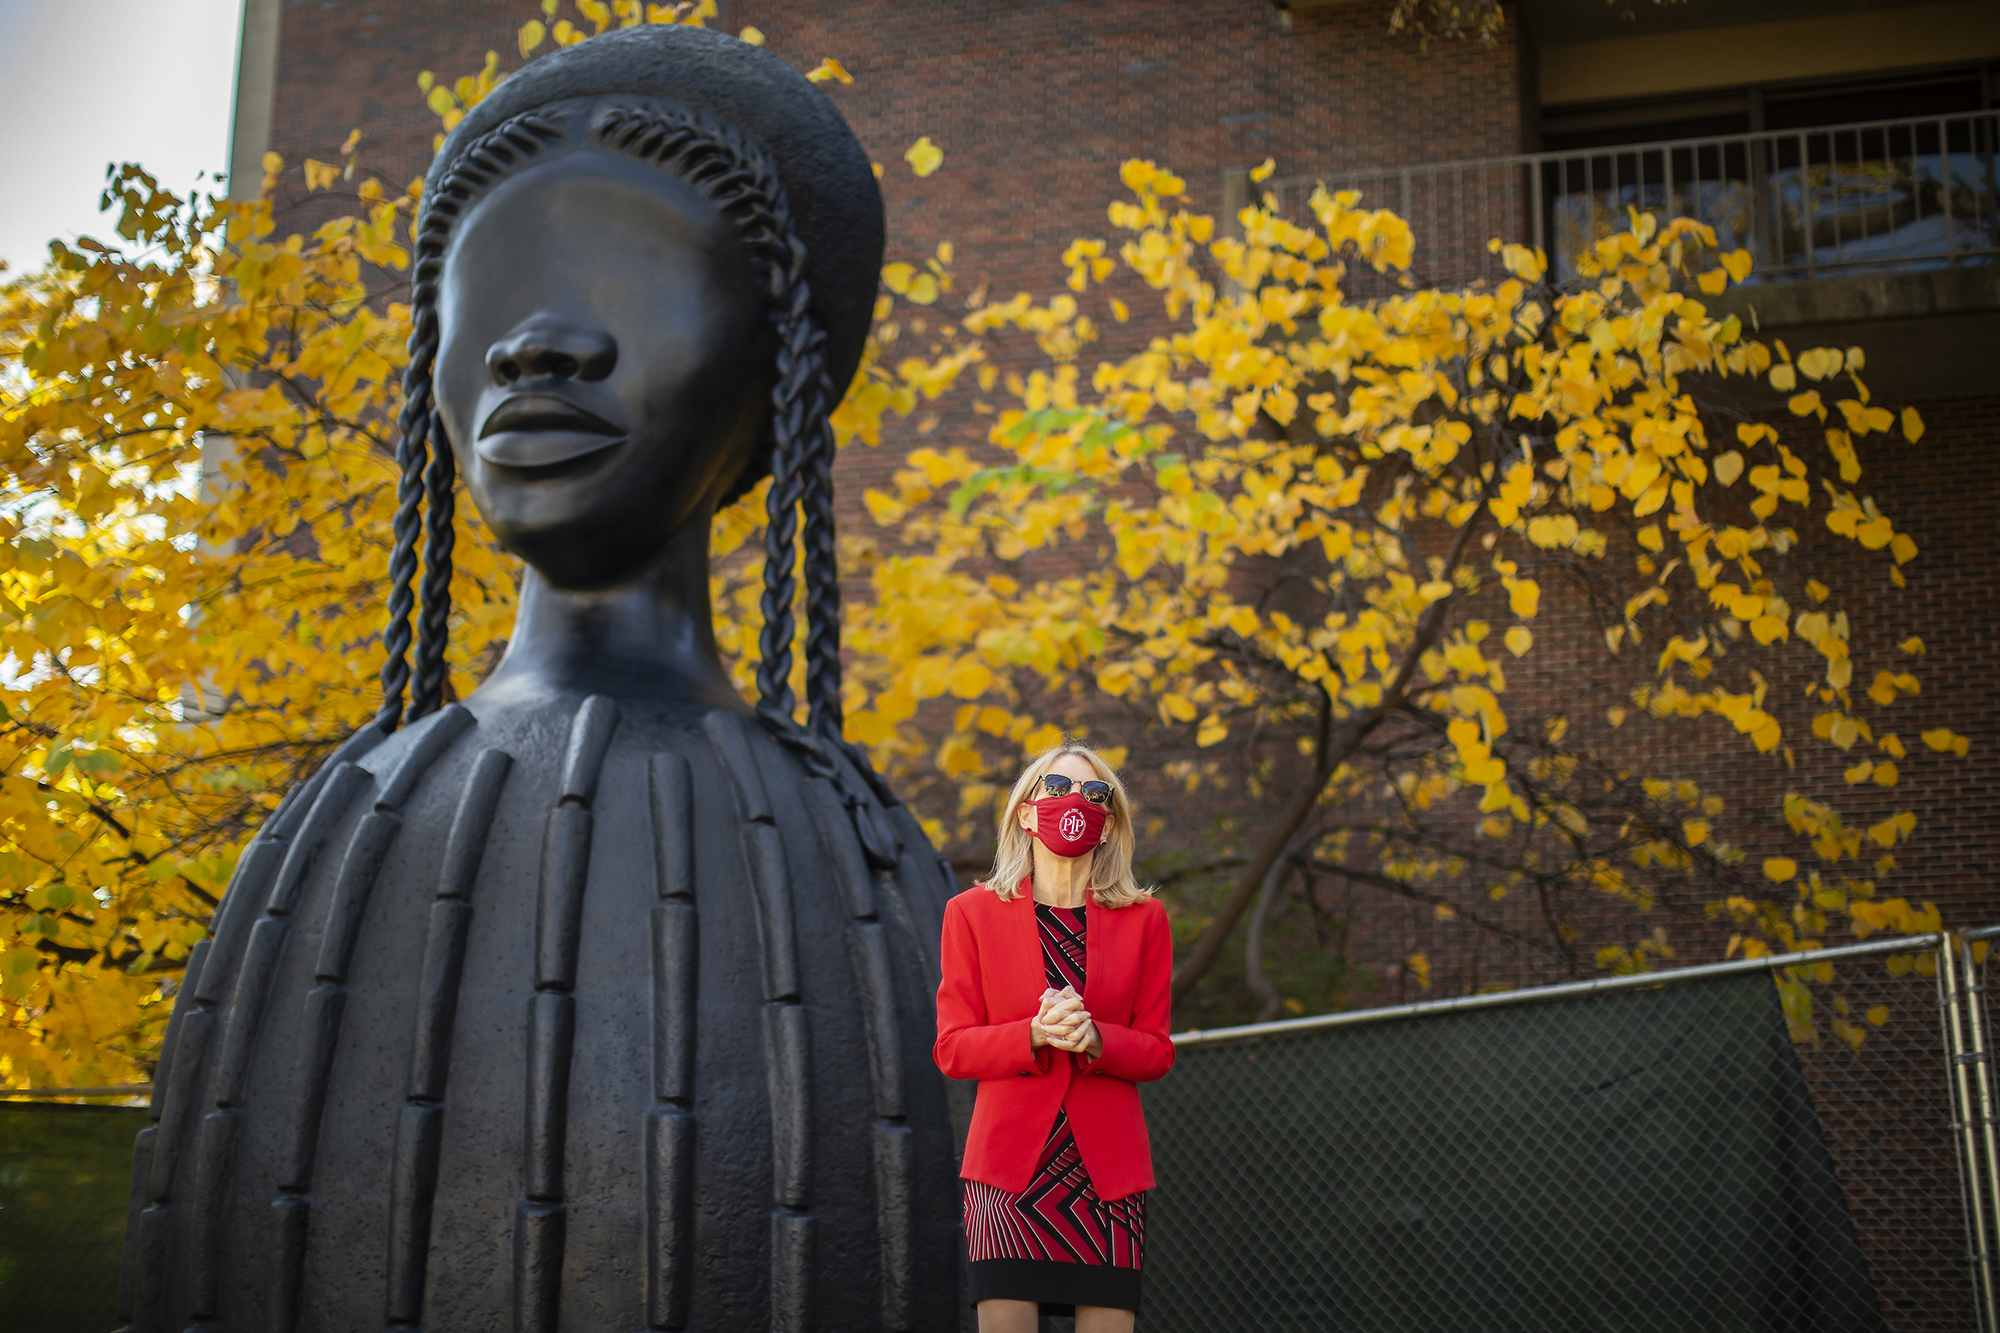 Amy Gutmann wearing a mask and sunglasses stands in front of the bronze sculpture “Brick House”